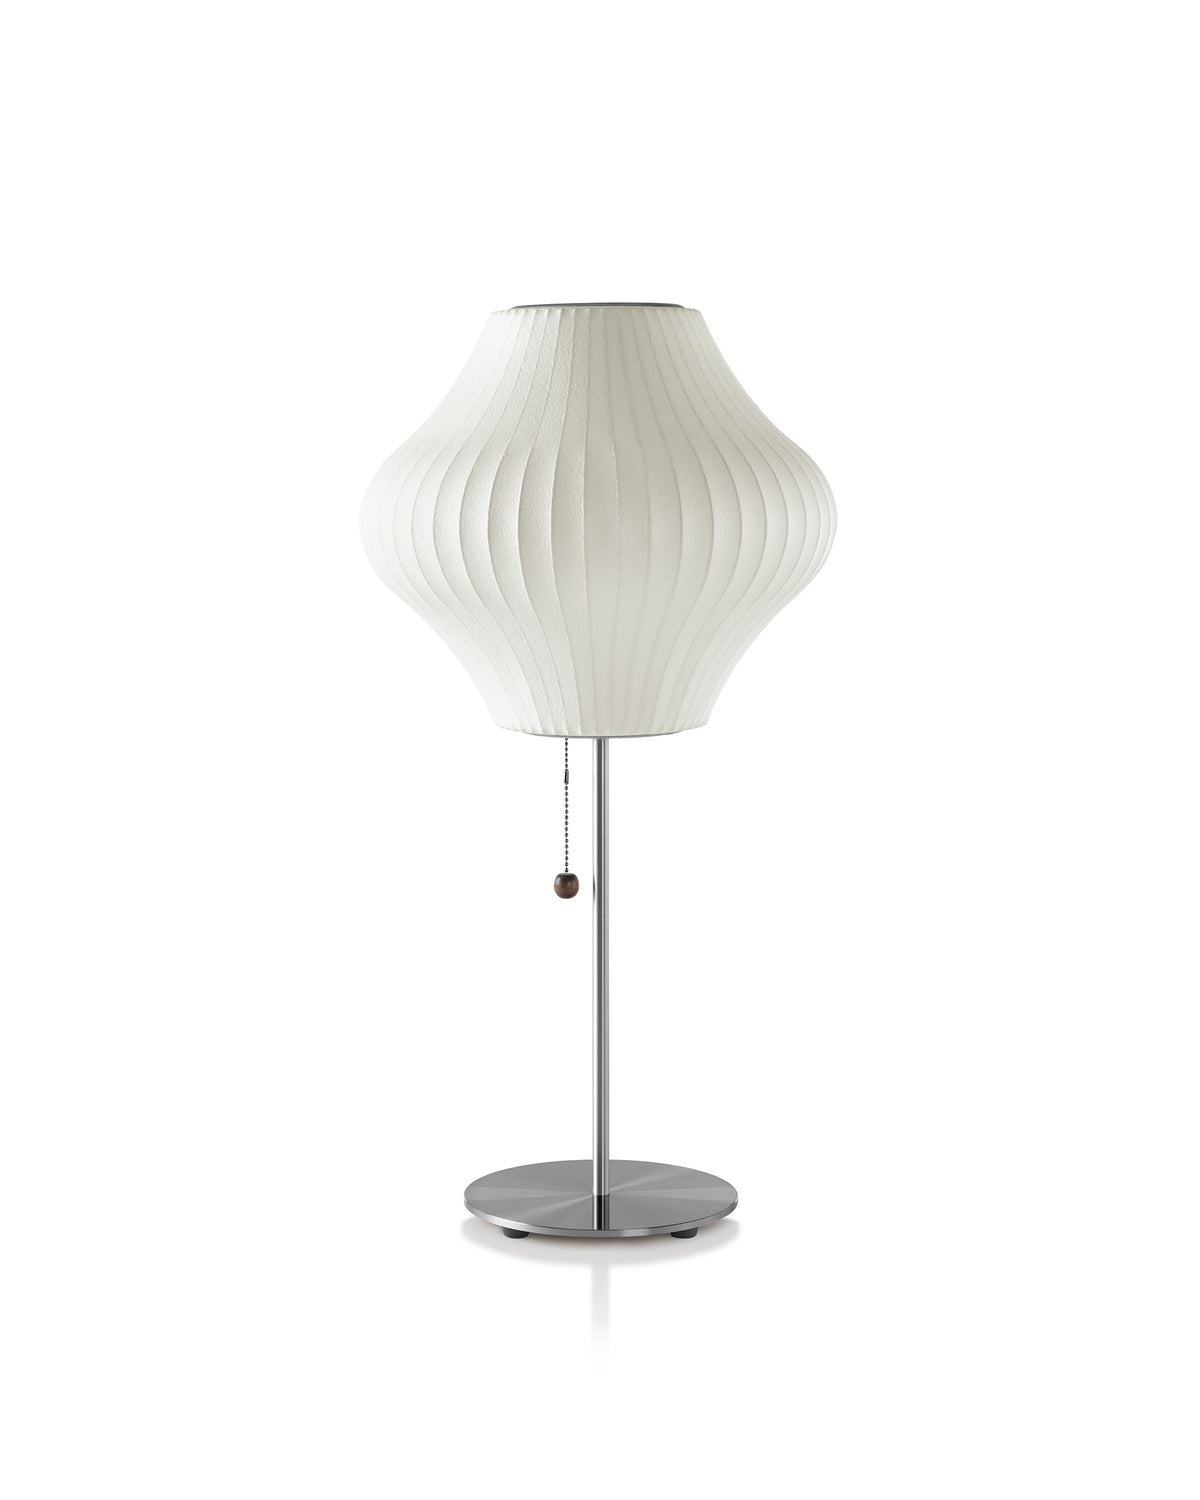 Nelson Pear Lotus Table Lamp